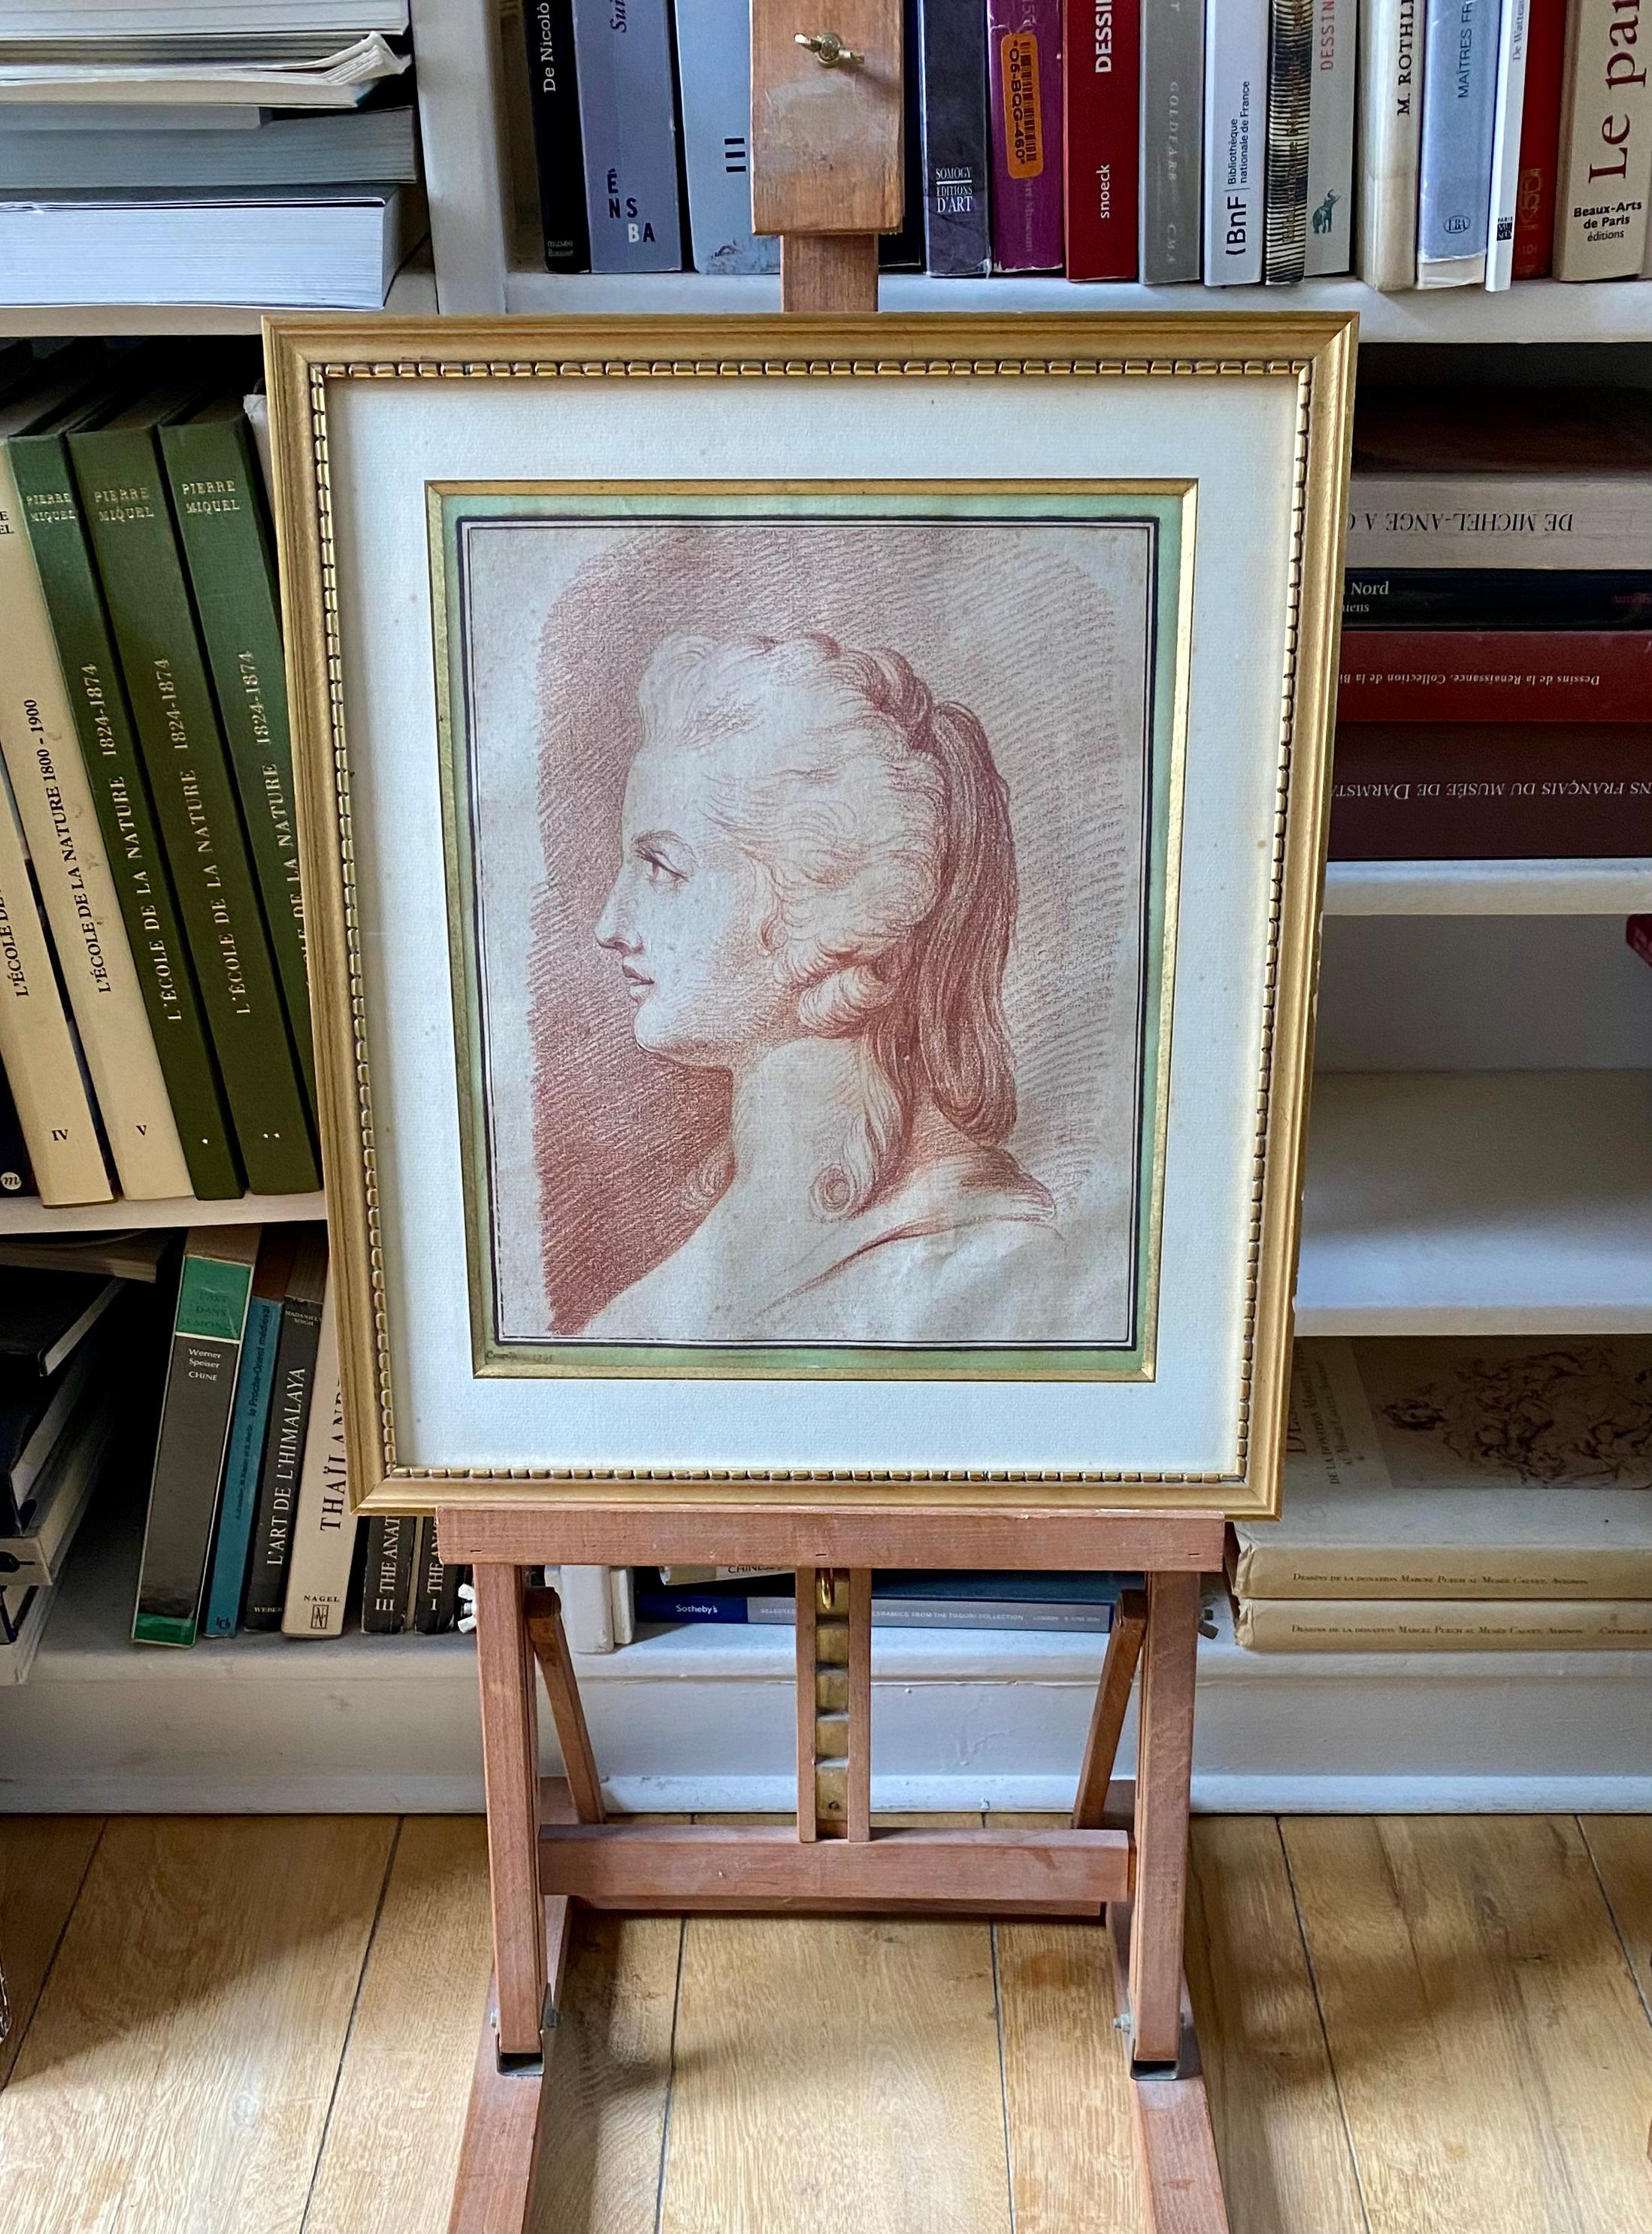 Nicolas-André COURTOIS
Paris 1734-1806

Bust of a woman in profile
1791
Sanguine
Signed and dated lower left on the original mount
43.5 x 37 cm framed
19 x 25 cm
